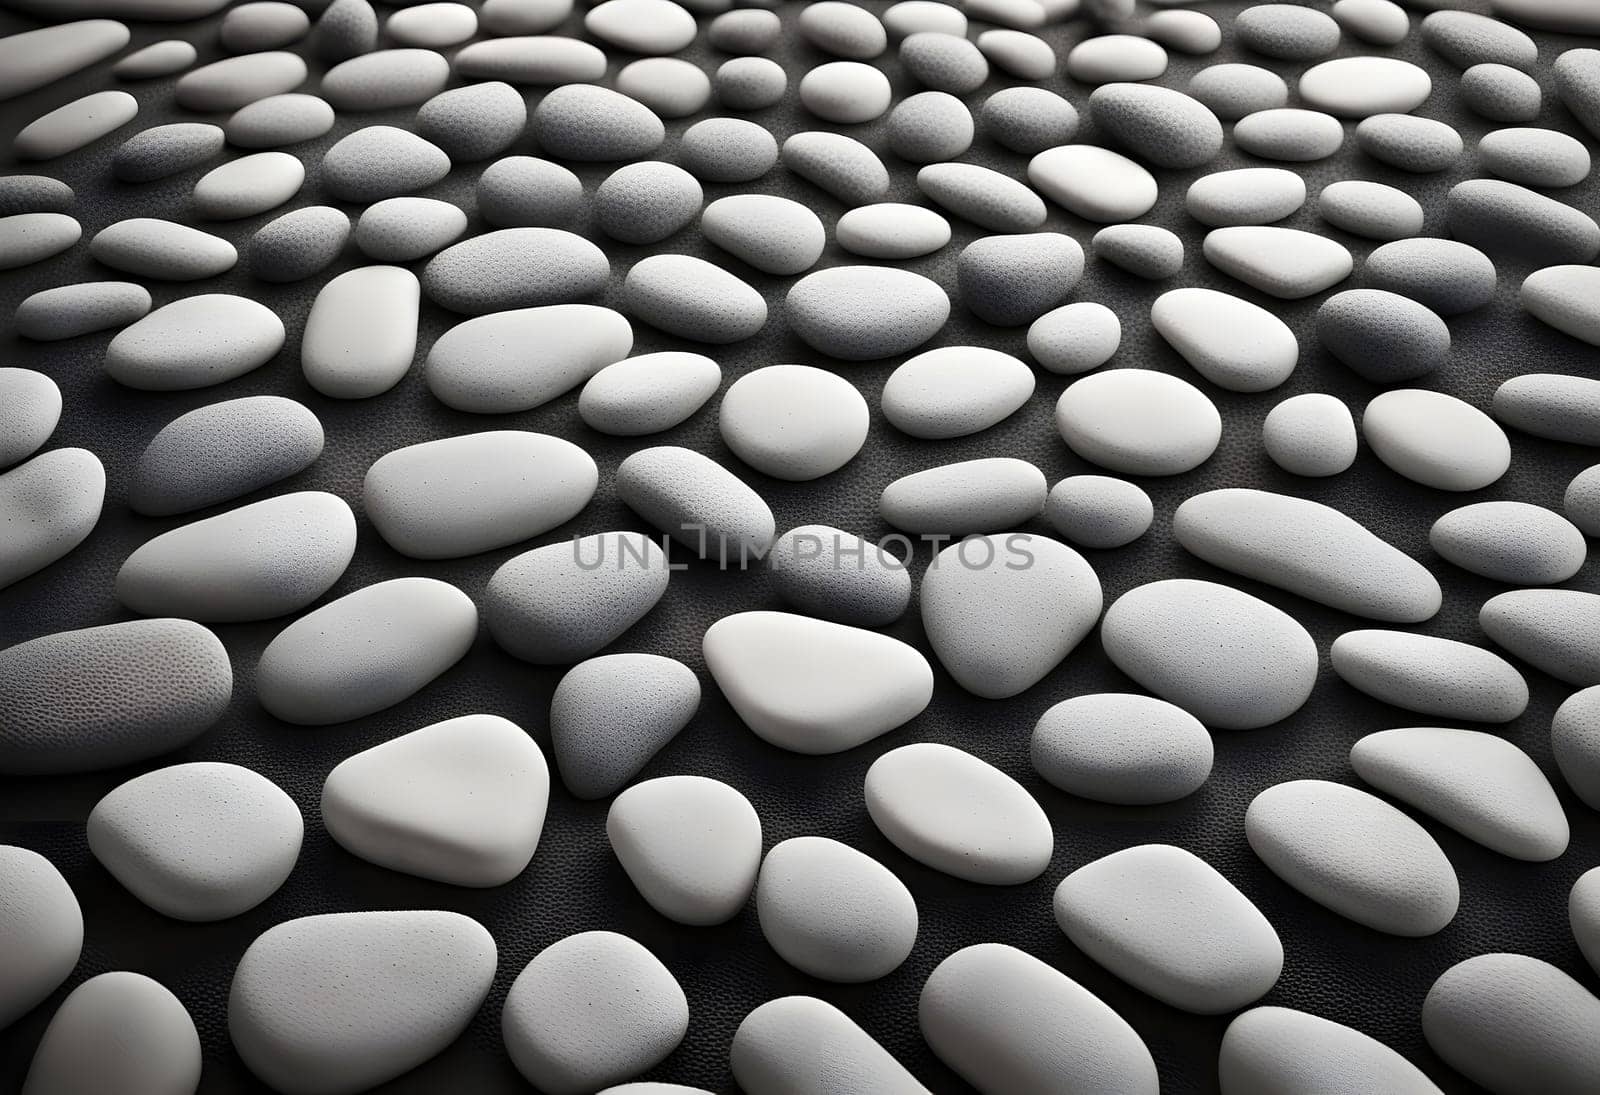 The painting shows many white stones on a black surface. Rocks come in a variety of sizes and shapes, from small pebbles to large boulders. Some stones are smooth and shiny, others are rough and broken. Generate AI